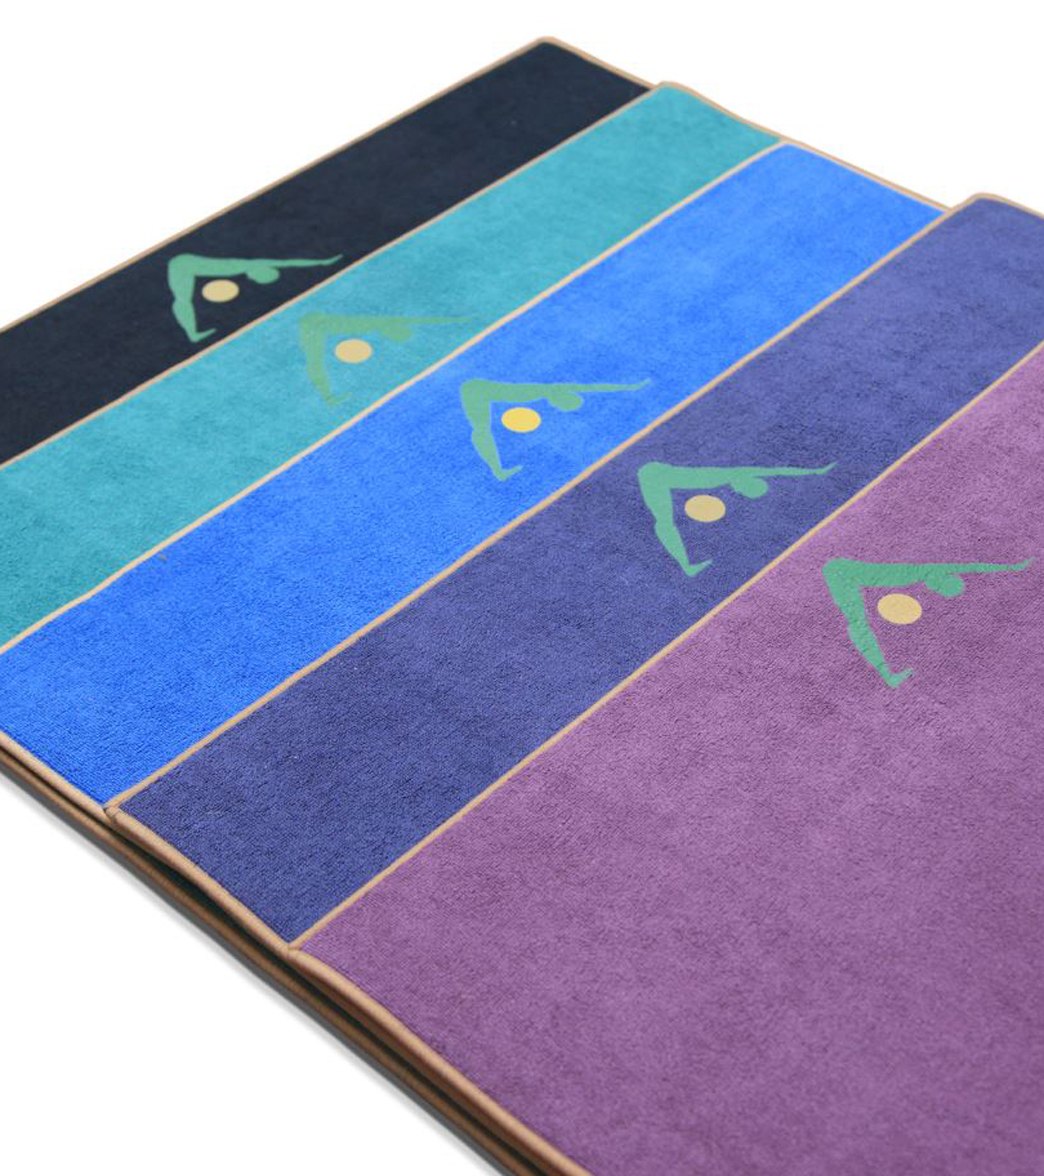 Aurorae Synergy Yoga Mat Review (Updated 2023)